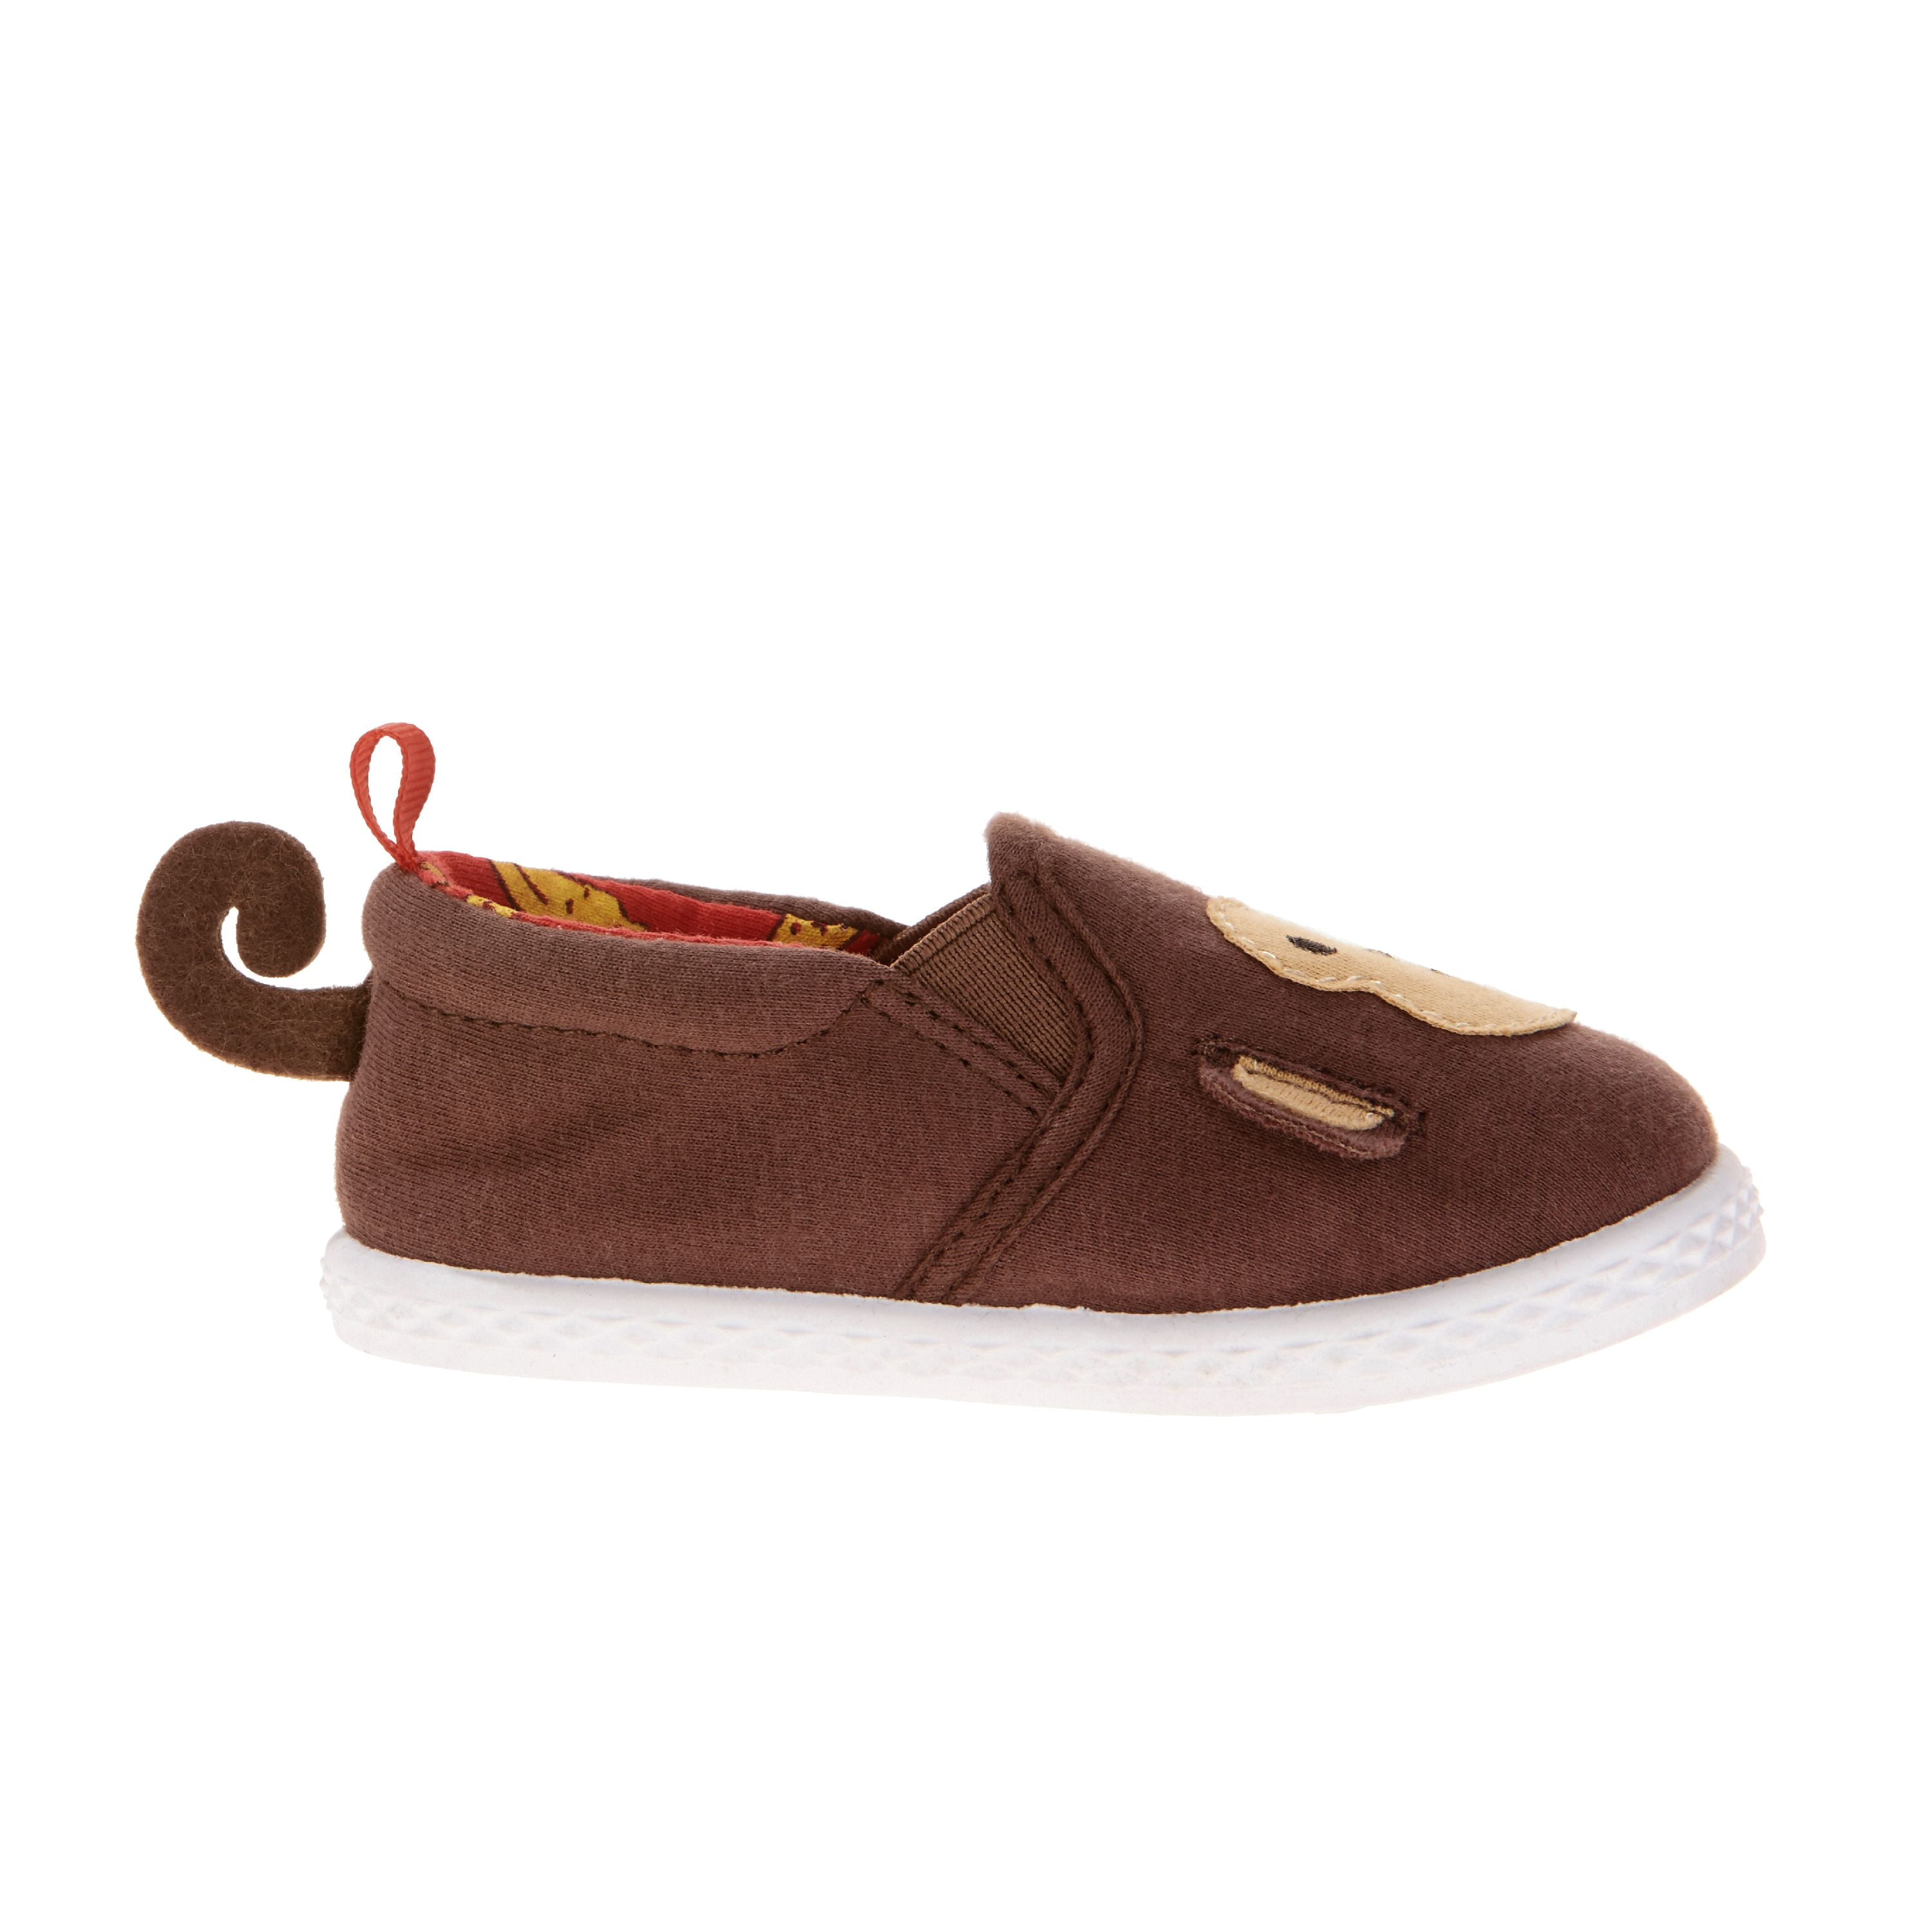 Walmart Brand Infant Toddler Boys Canvas Slip On Shoes Brown Monkey Size 5 NEW